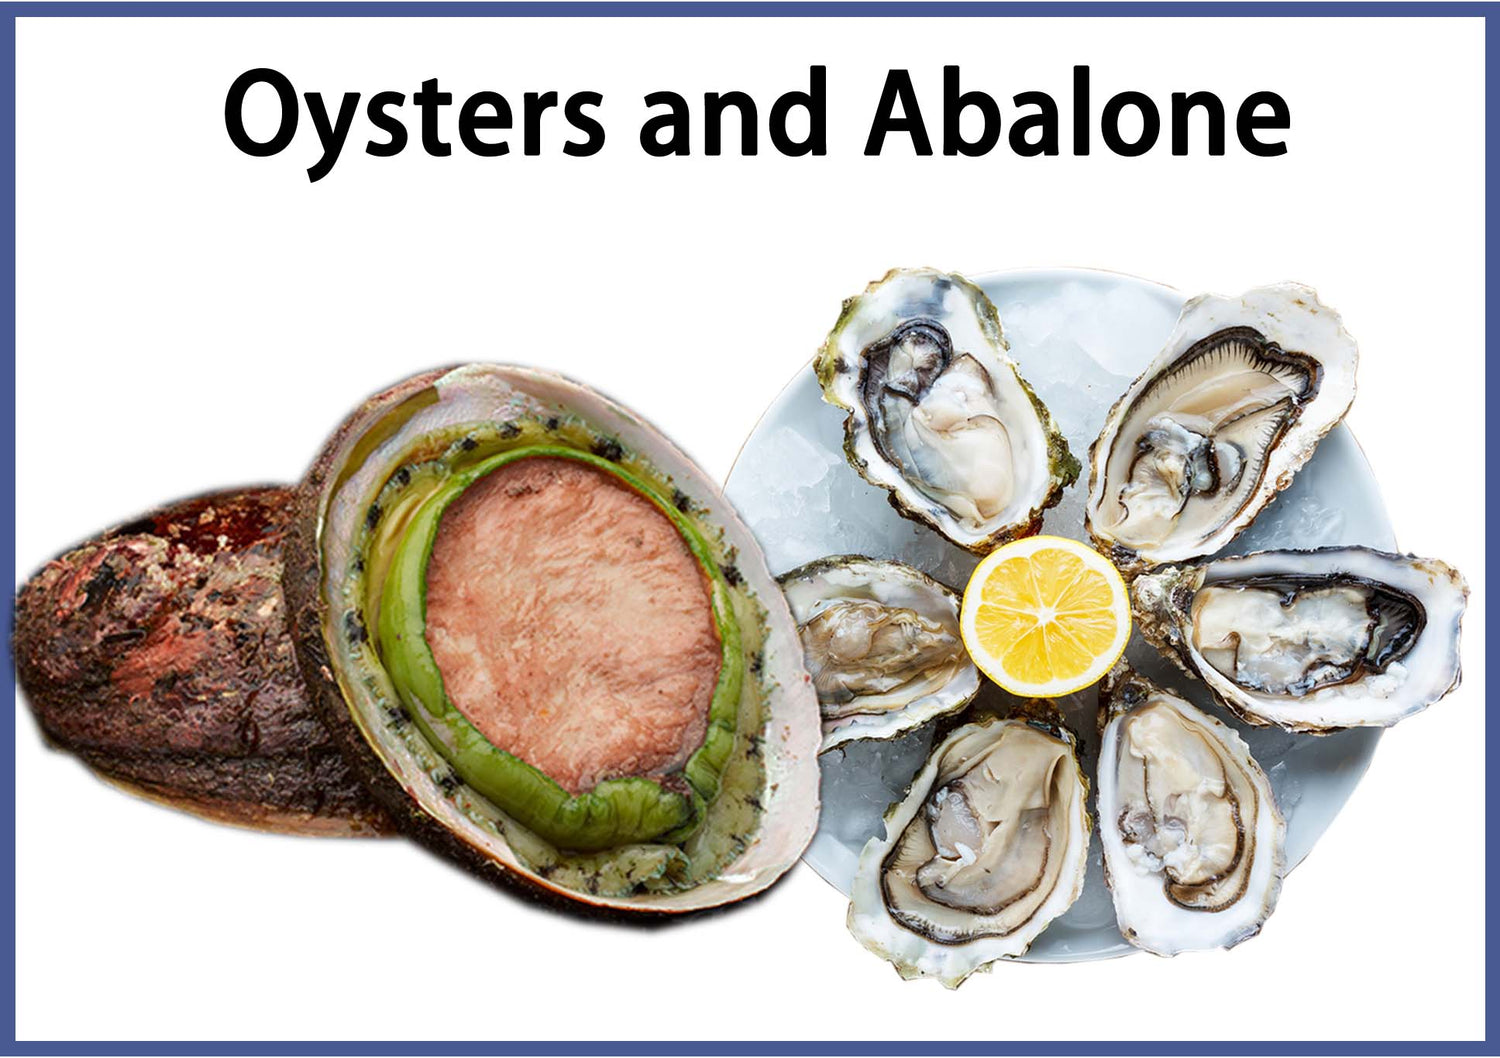 Oysters and Abalone